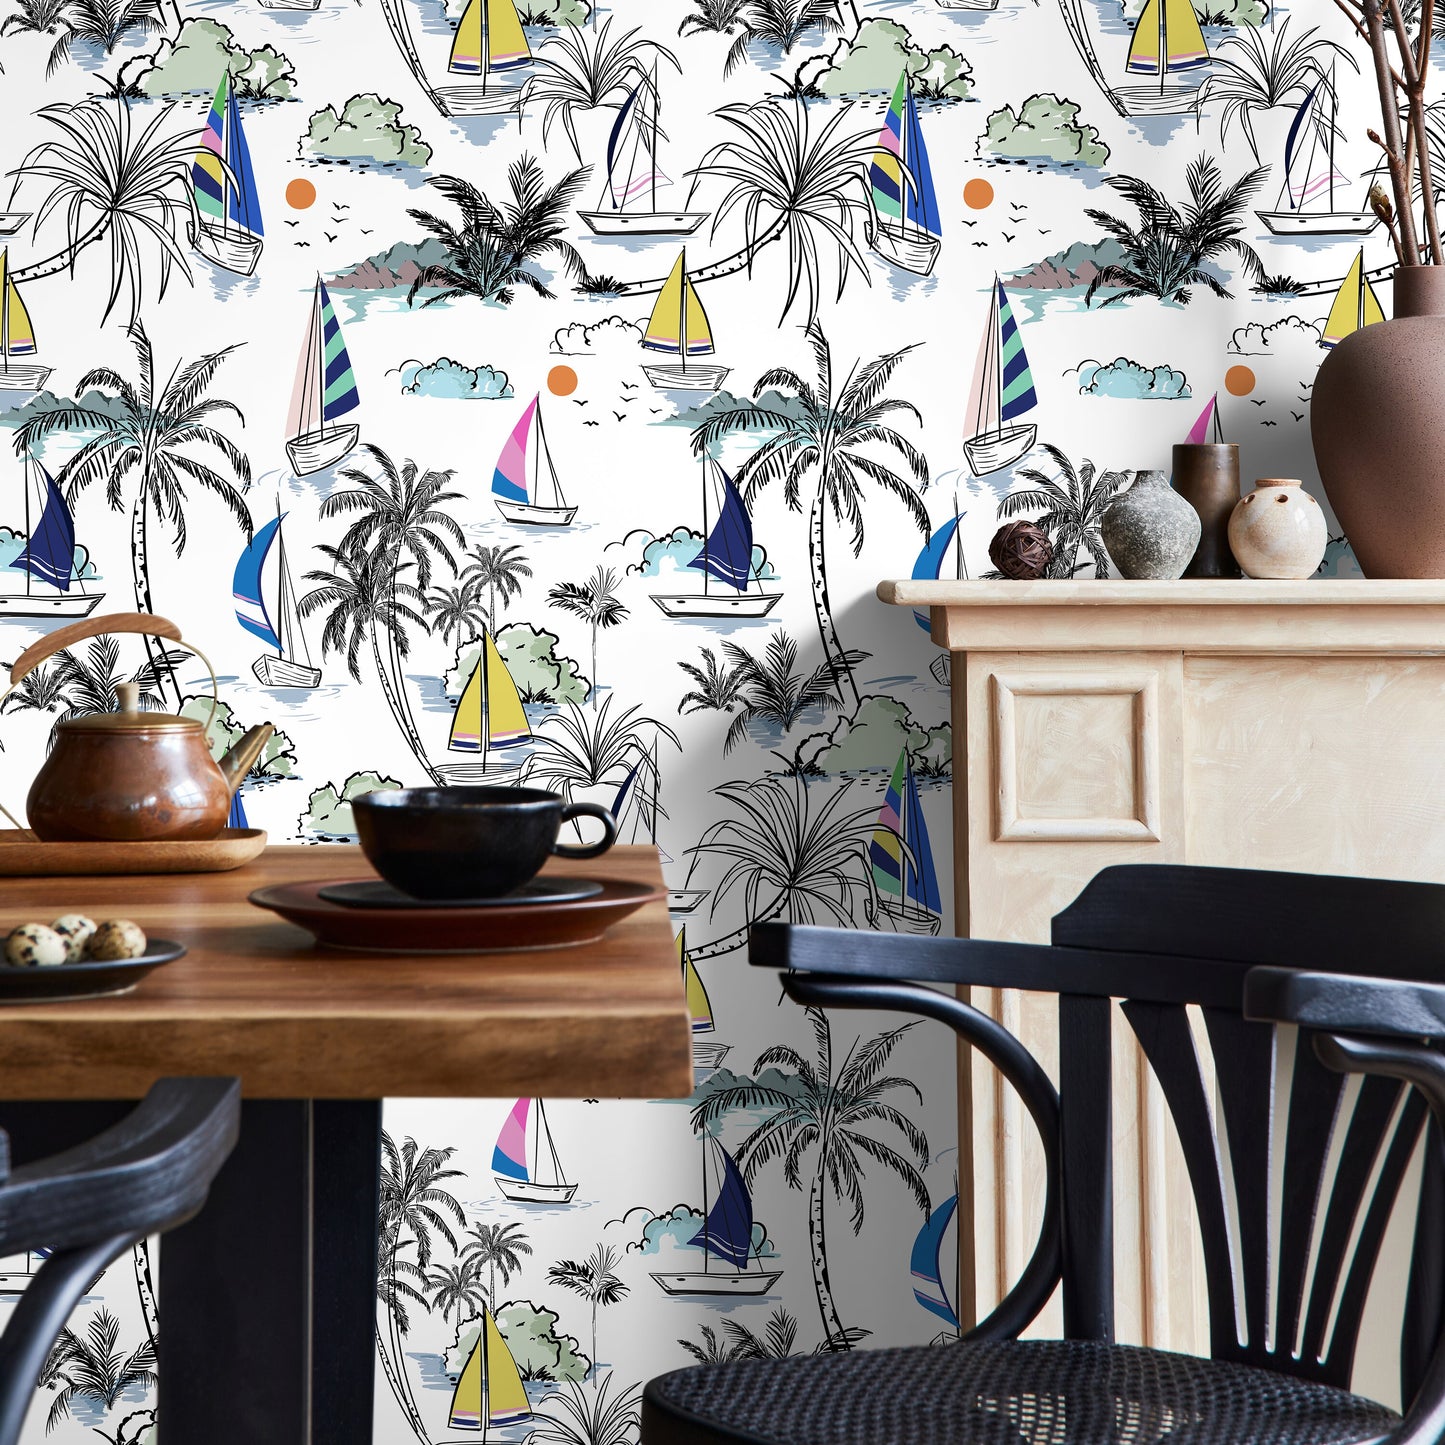 Removable Wallpaper Peel and Stick Wallpaper Wall Paper Wall Temporary Wallpaper Wall - Sailing Boat - Palms - B540